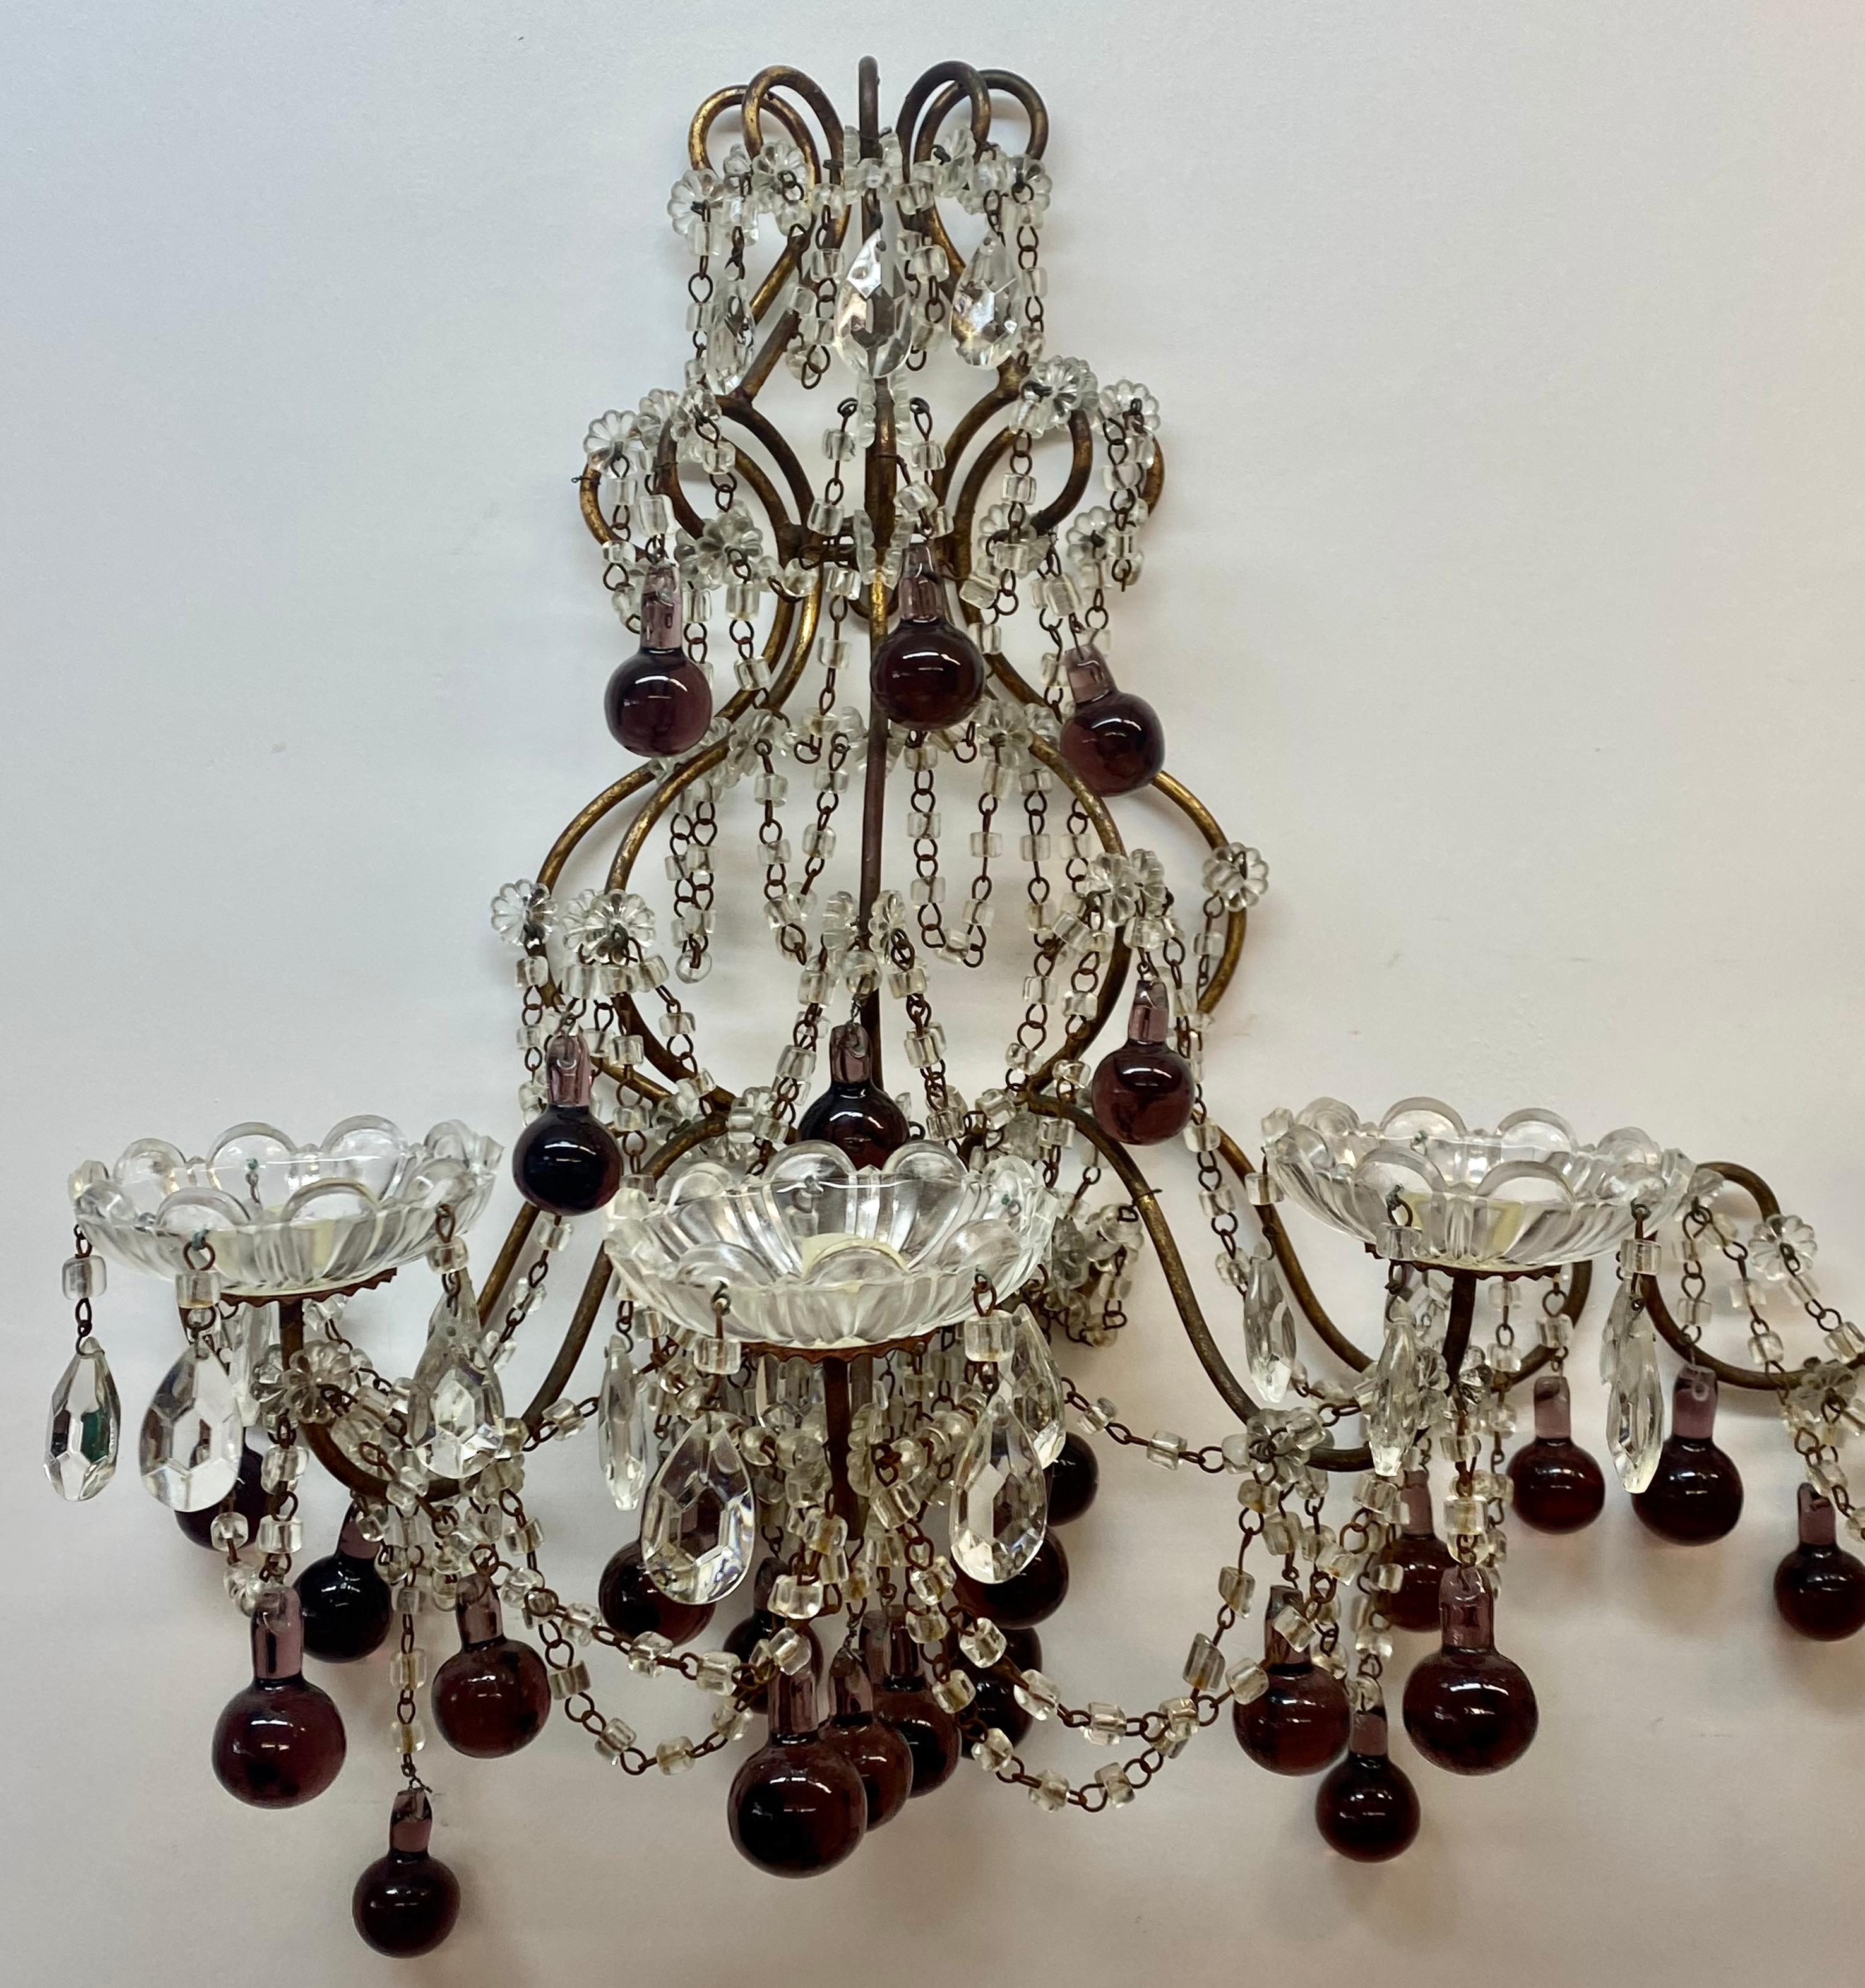 Vintage wrought iron, crystal & glass wall sconces c.1930

Sumptuous pair of wall sconces with pressed glass, crystal and purple glass drops

Each sconce measures 16